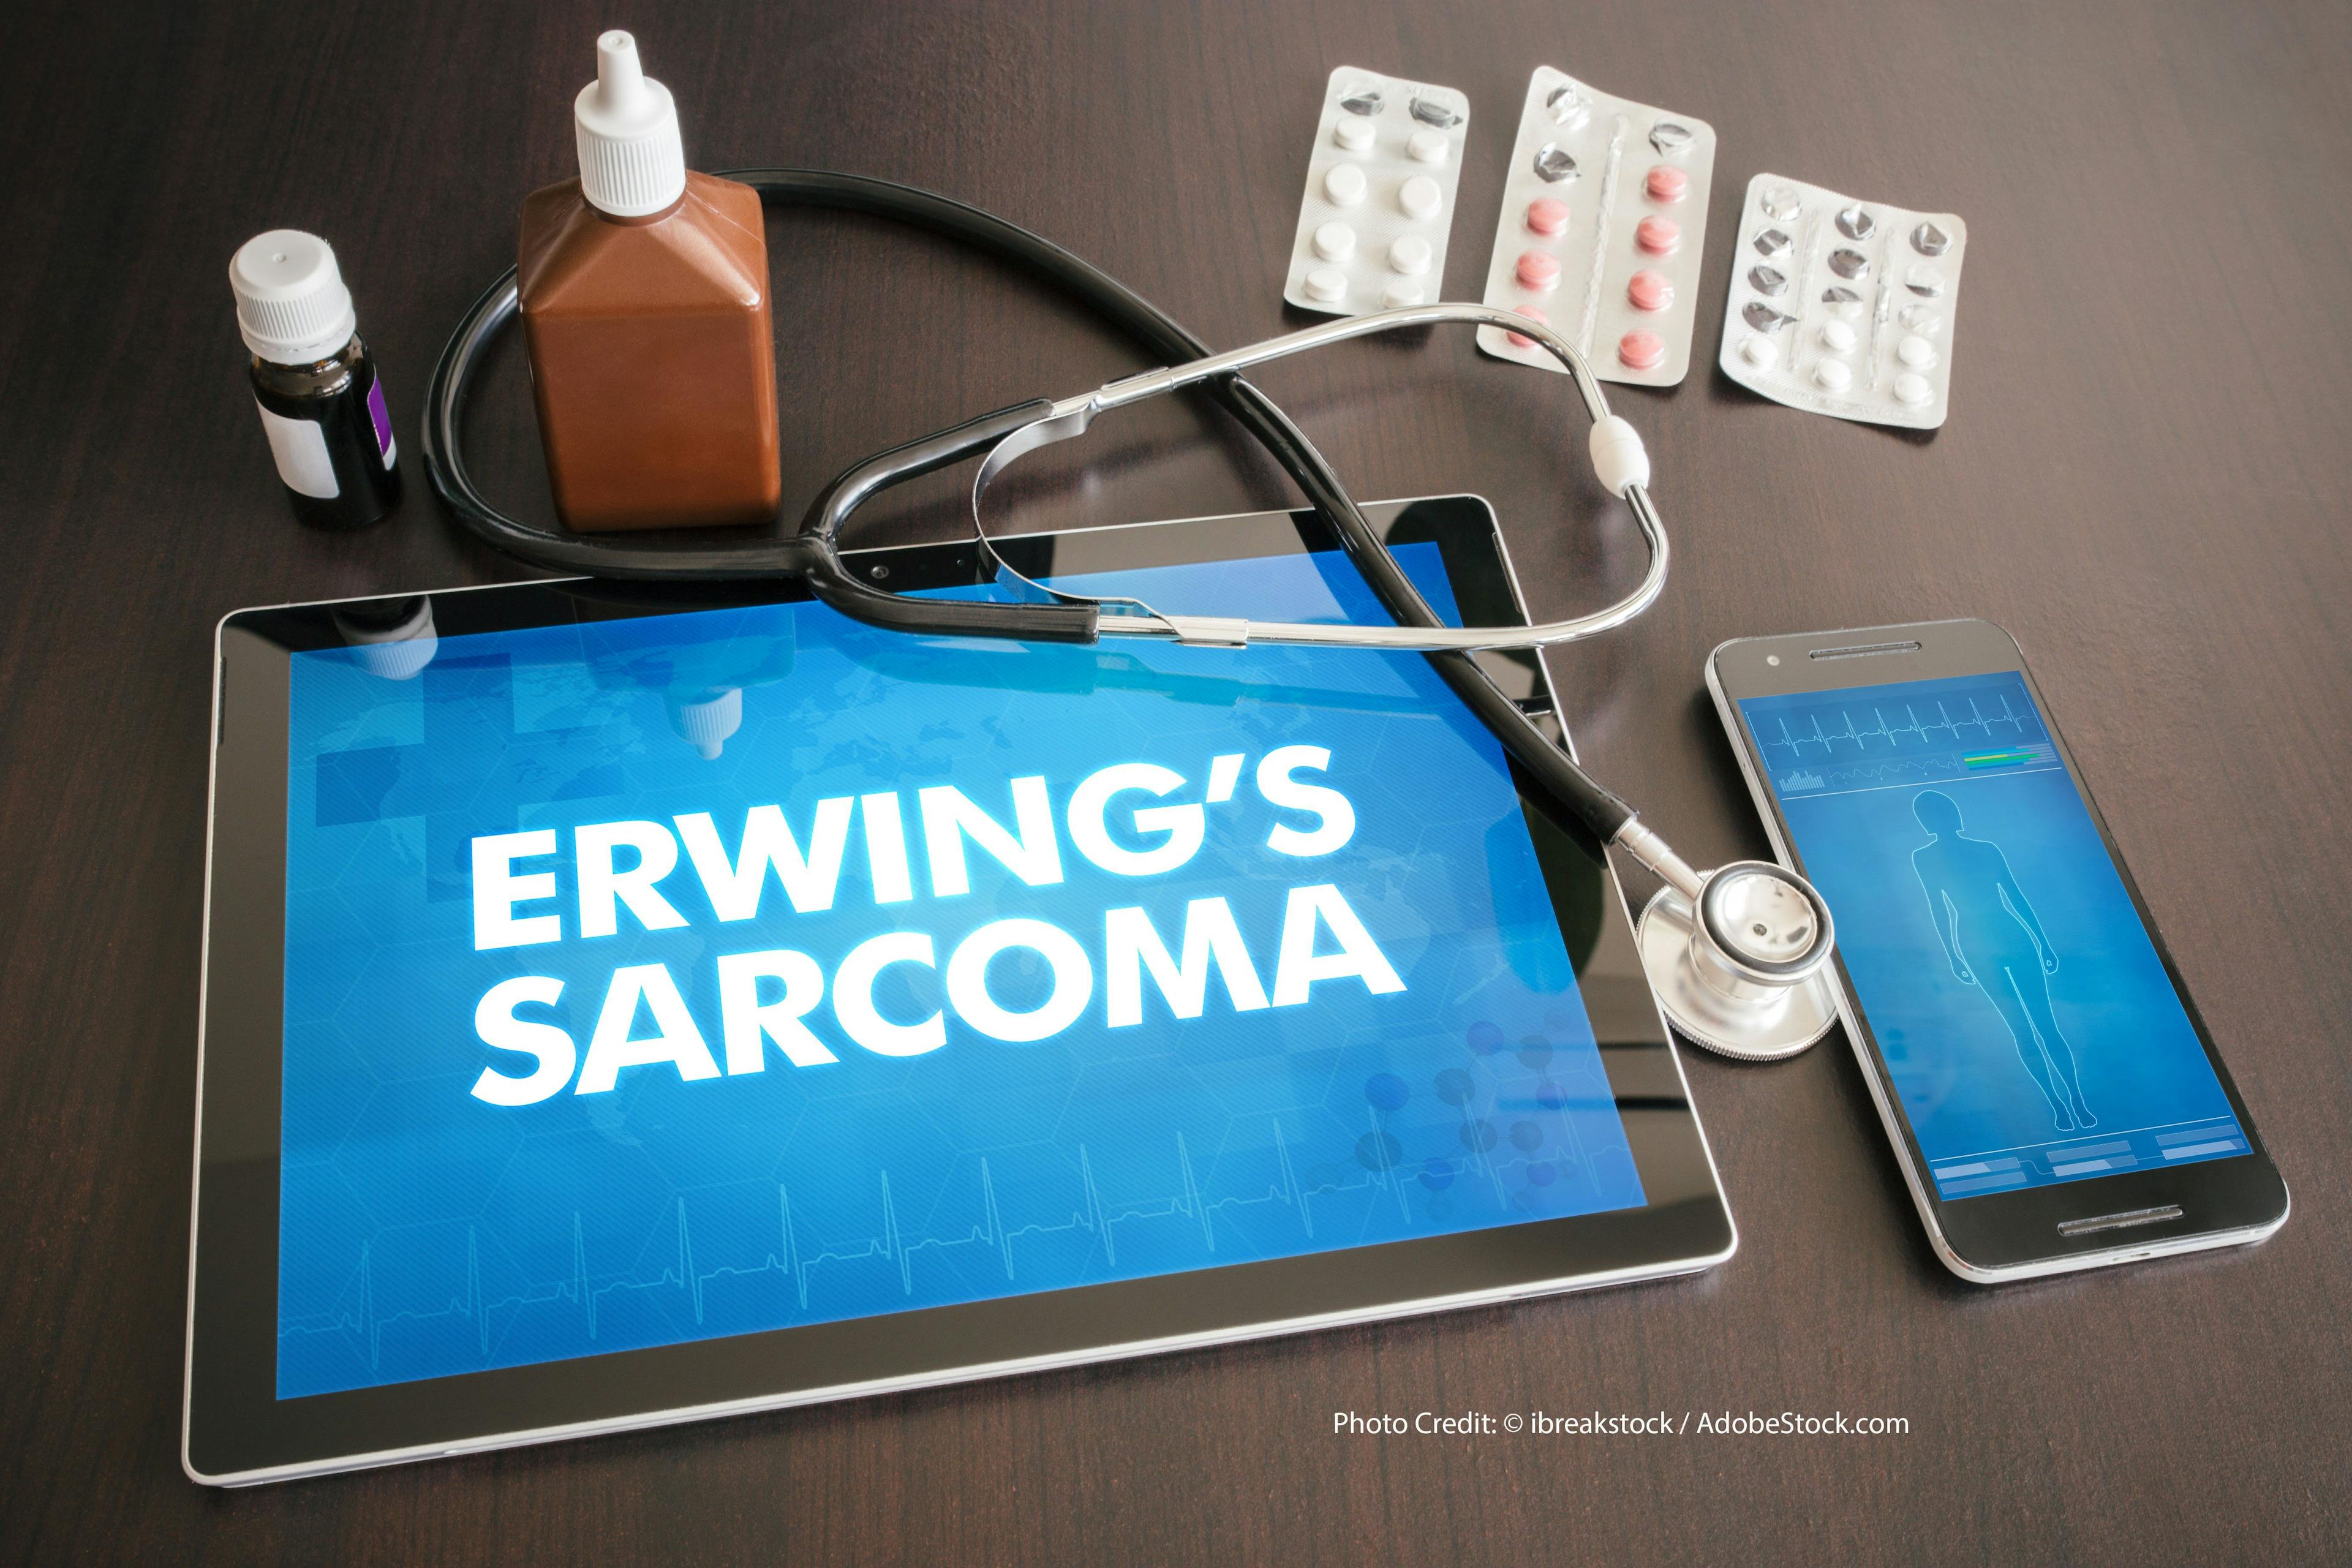 Are We Underdosing Patients With Ewing Sarcoma?